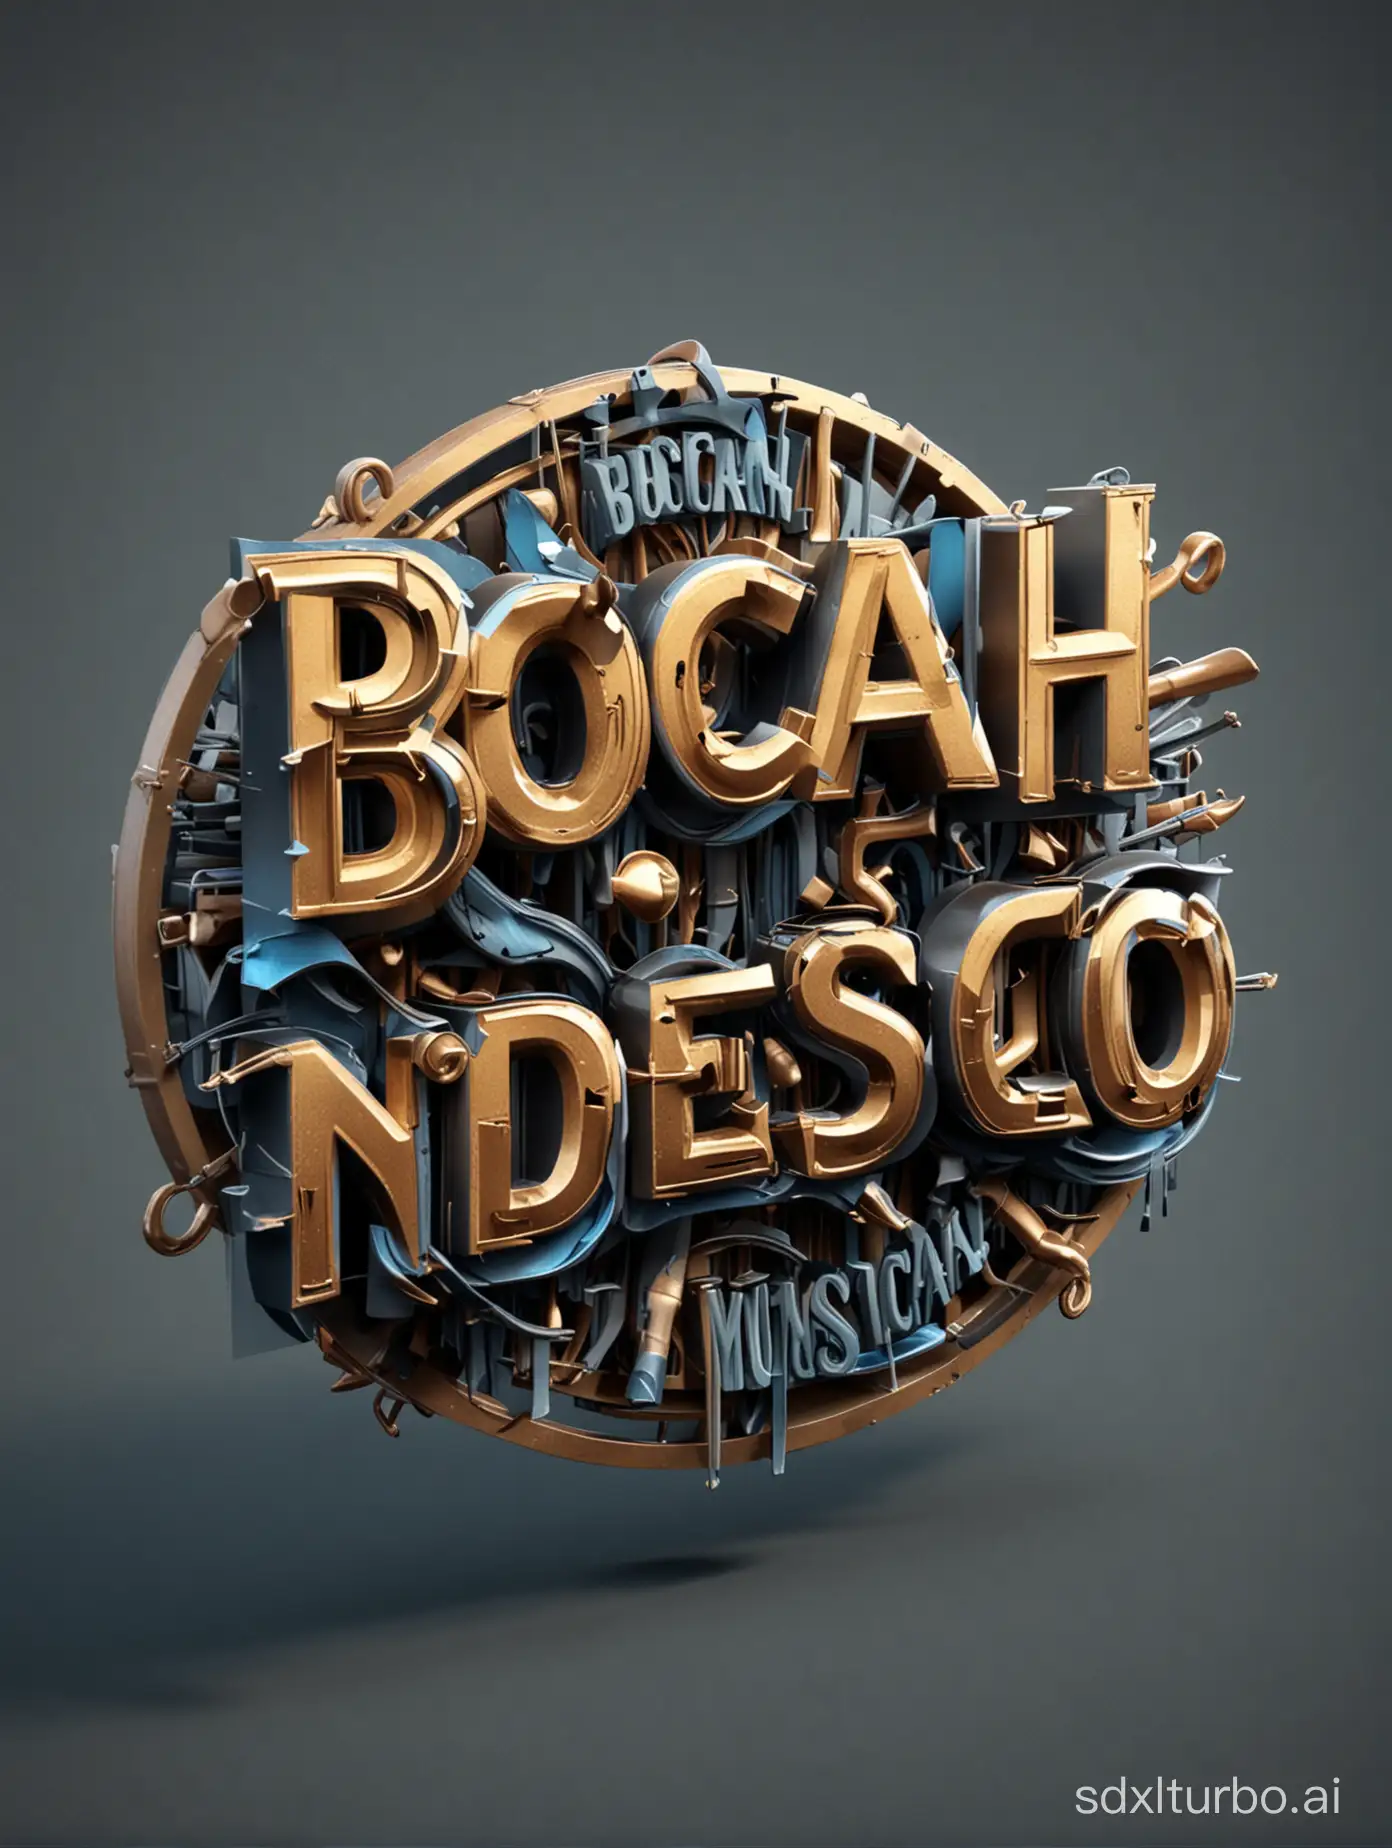 BOCAH-NDESO-Musical-Band-Professional-Logo-in-3D